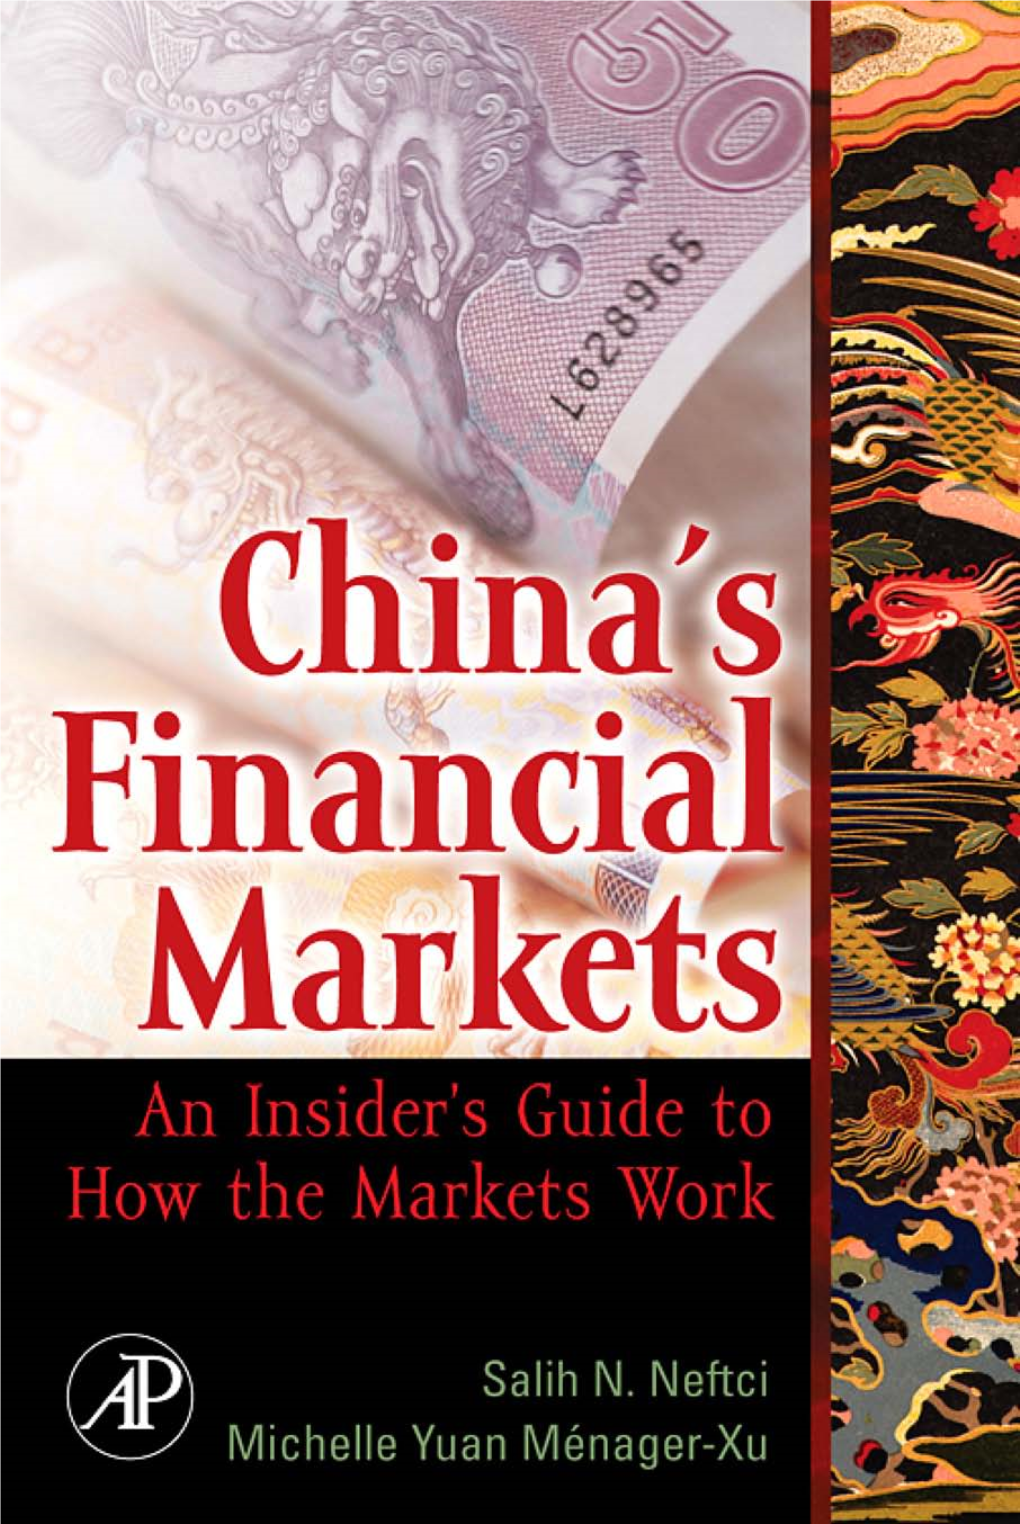 China's Financial Markets: an Insider's Guide to How the Markets Work